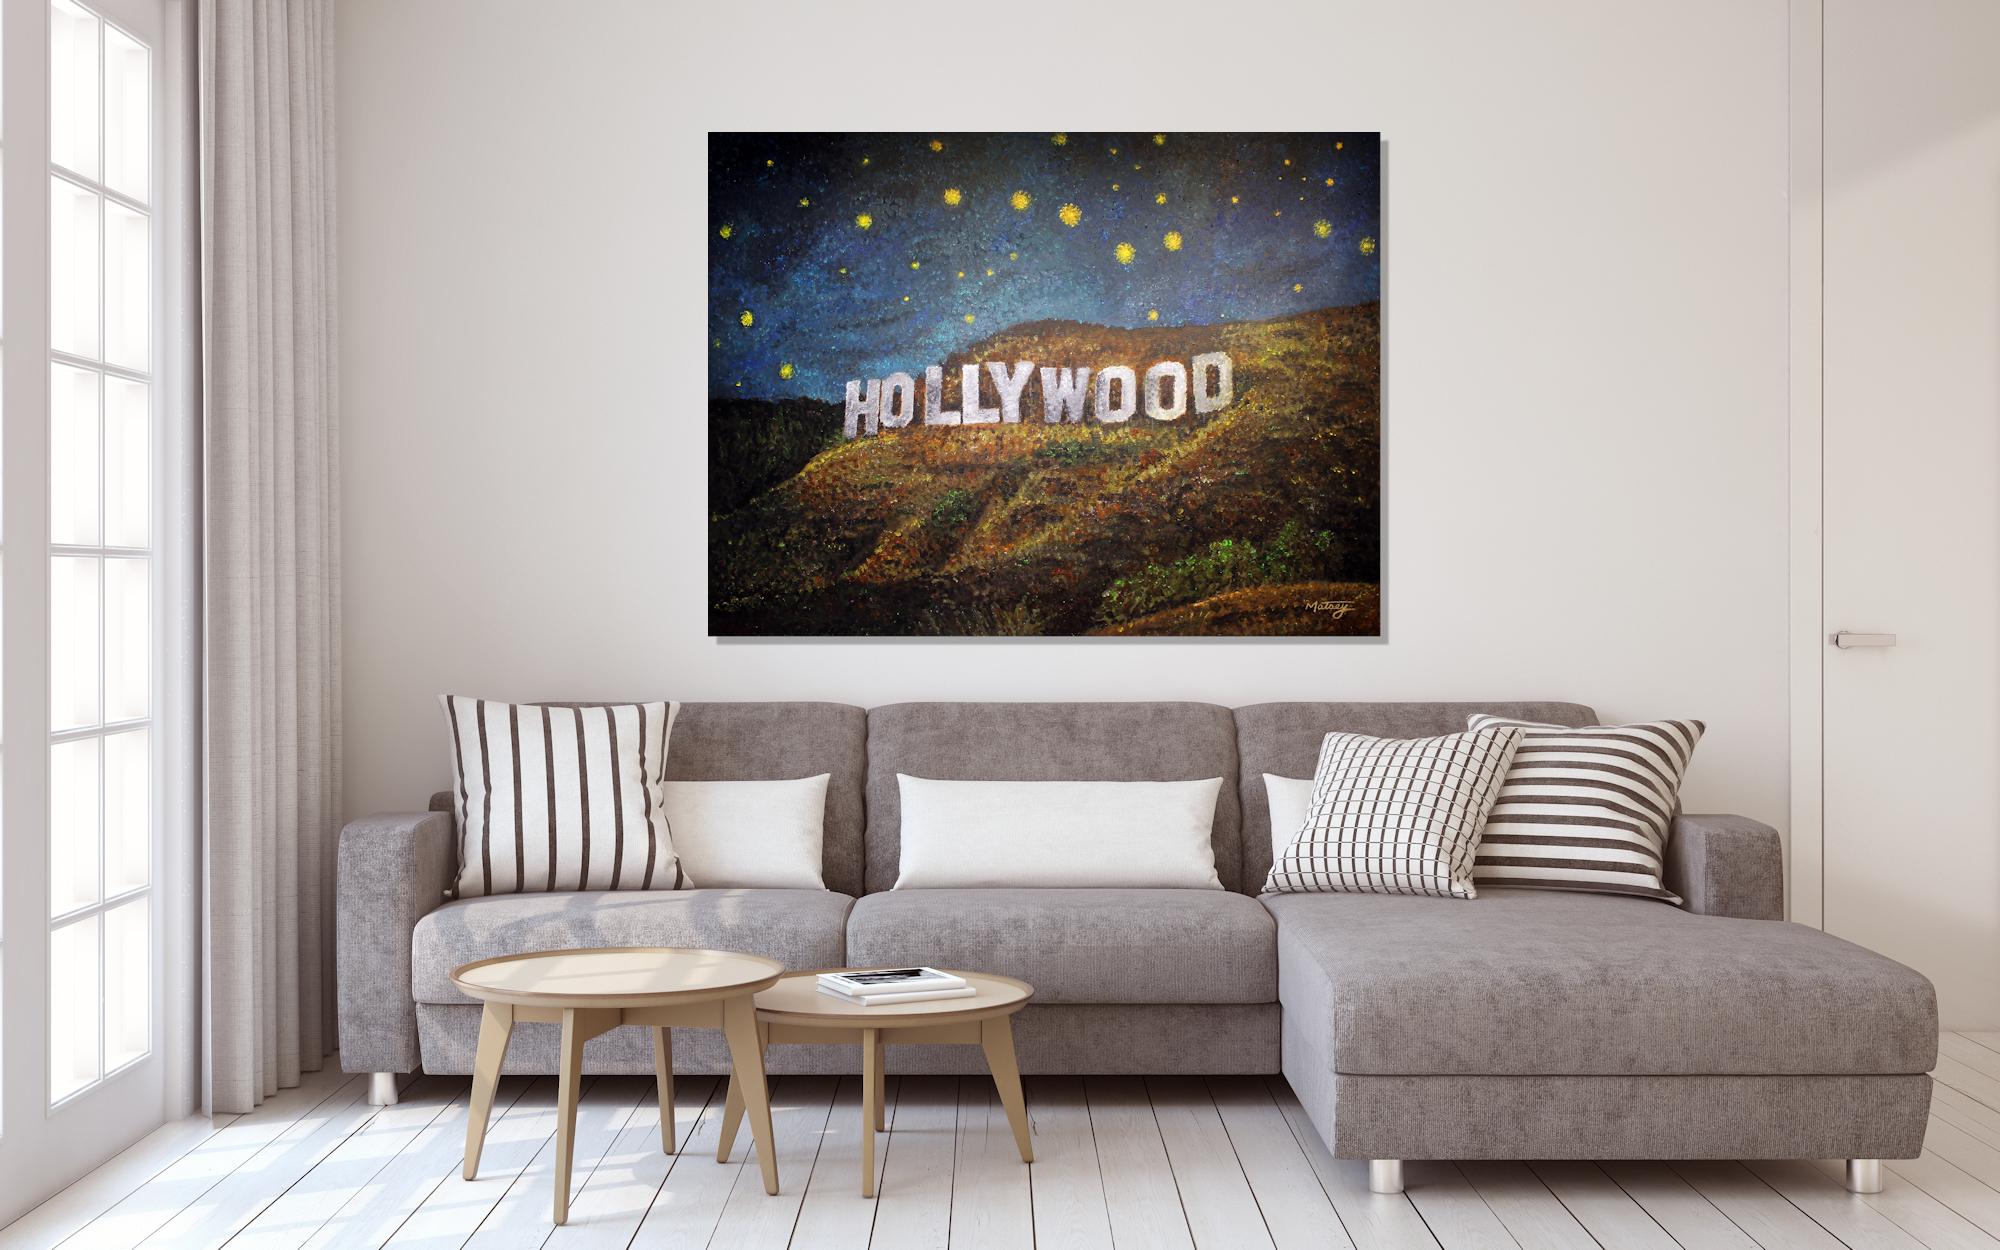 The Hollywood Sign is an American landmark and cultural icon located in Los Angeles, California. It is situated on Mount Lee, in the Hollywood Hills area of the Santa Monica Mountains.  This painting pulls inspiration from Vincent Van Gogh's